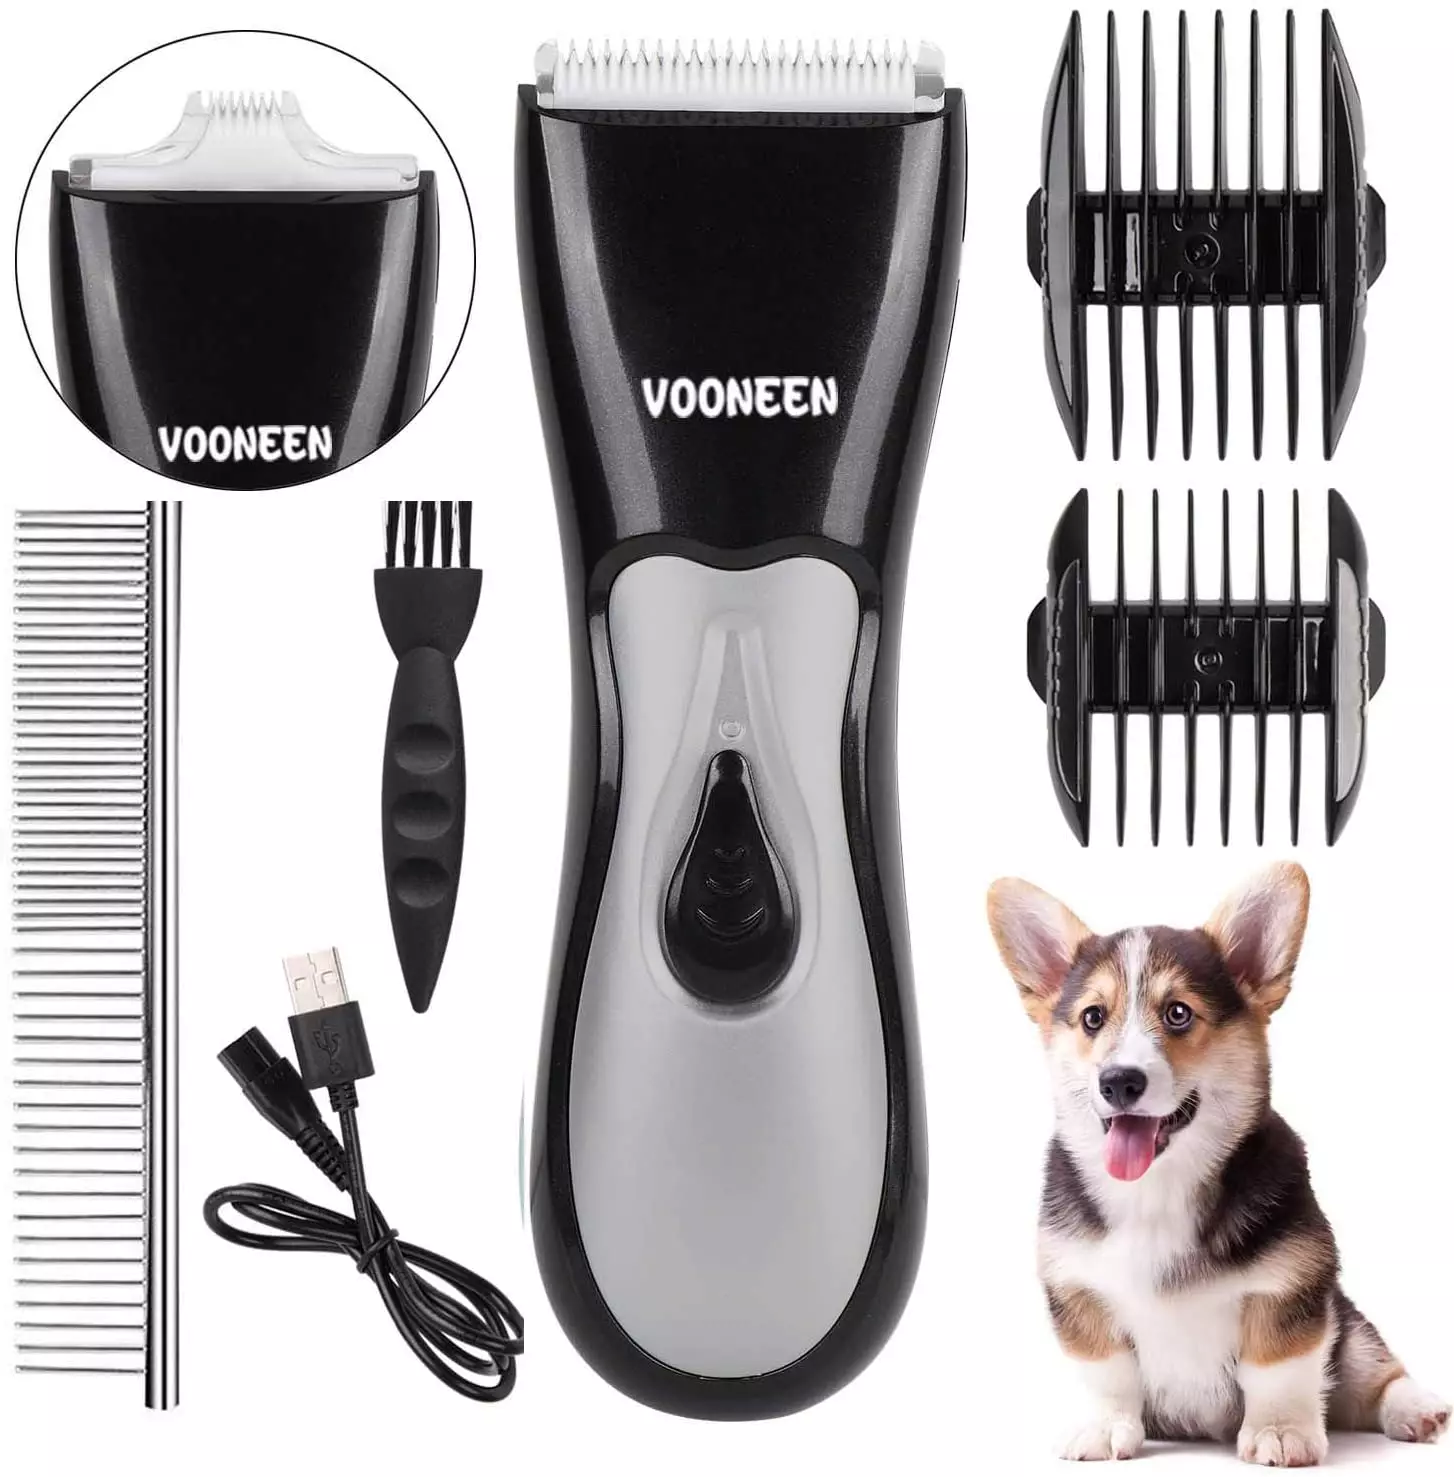 The VOONEEN dog grooming kit is one of Amazon's top-rated products (